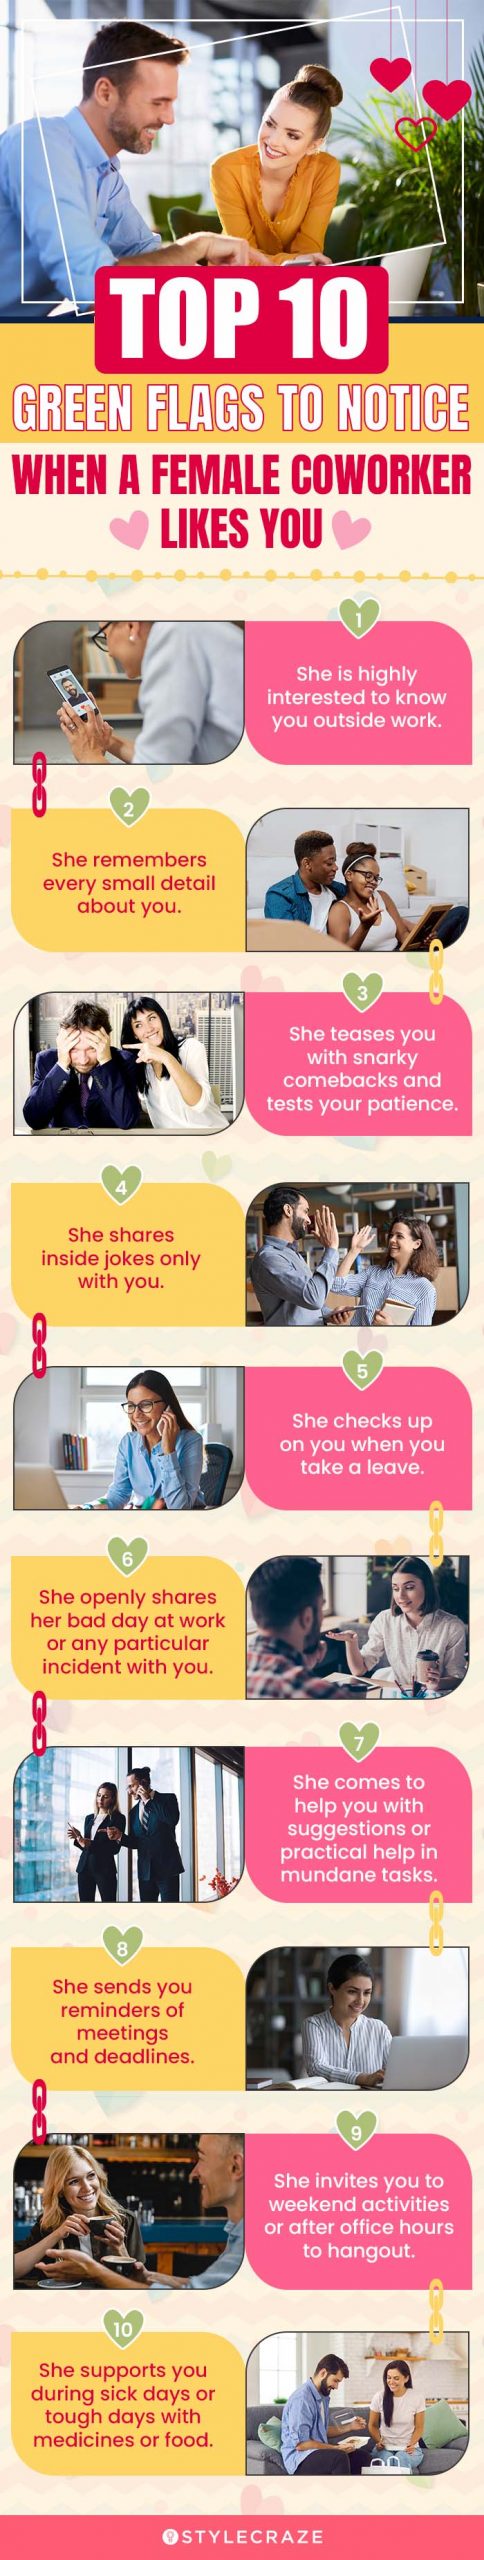 top 10 green flags to notice when a female coworker likes you (infographic)